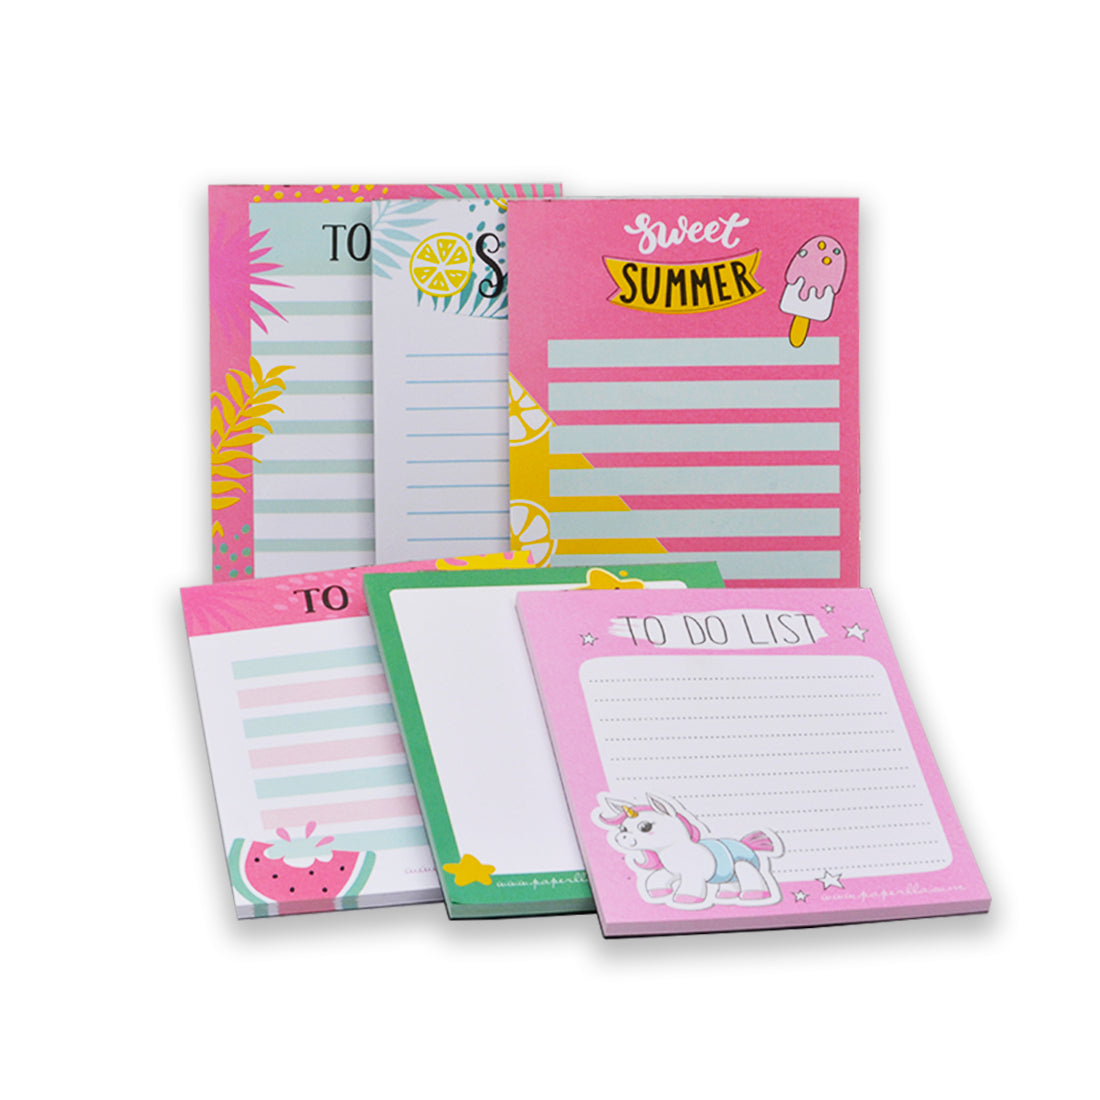 Buy aovowog Unicorn Gifts for Girls, Cute Stationery Set Supplies Girls for  Girls, Pencil Case, Portable Bag, Sticky Notes and Stickers, Great Birthday  Gifts for KIDS Age 5 6 7 8 9